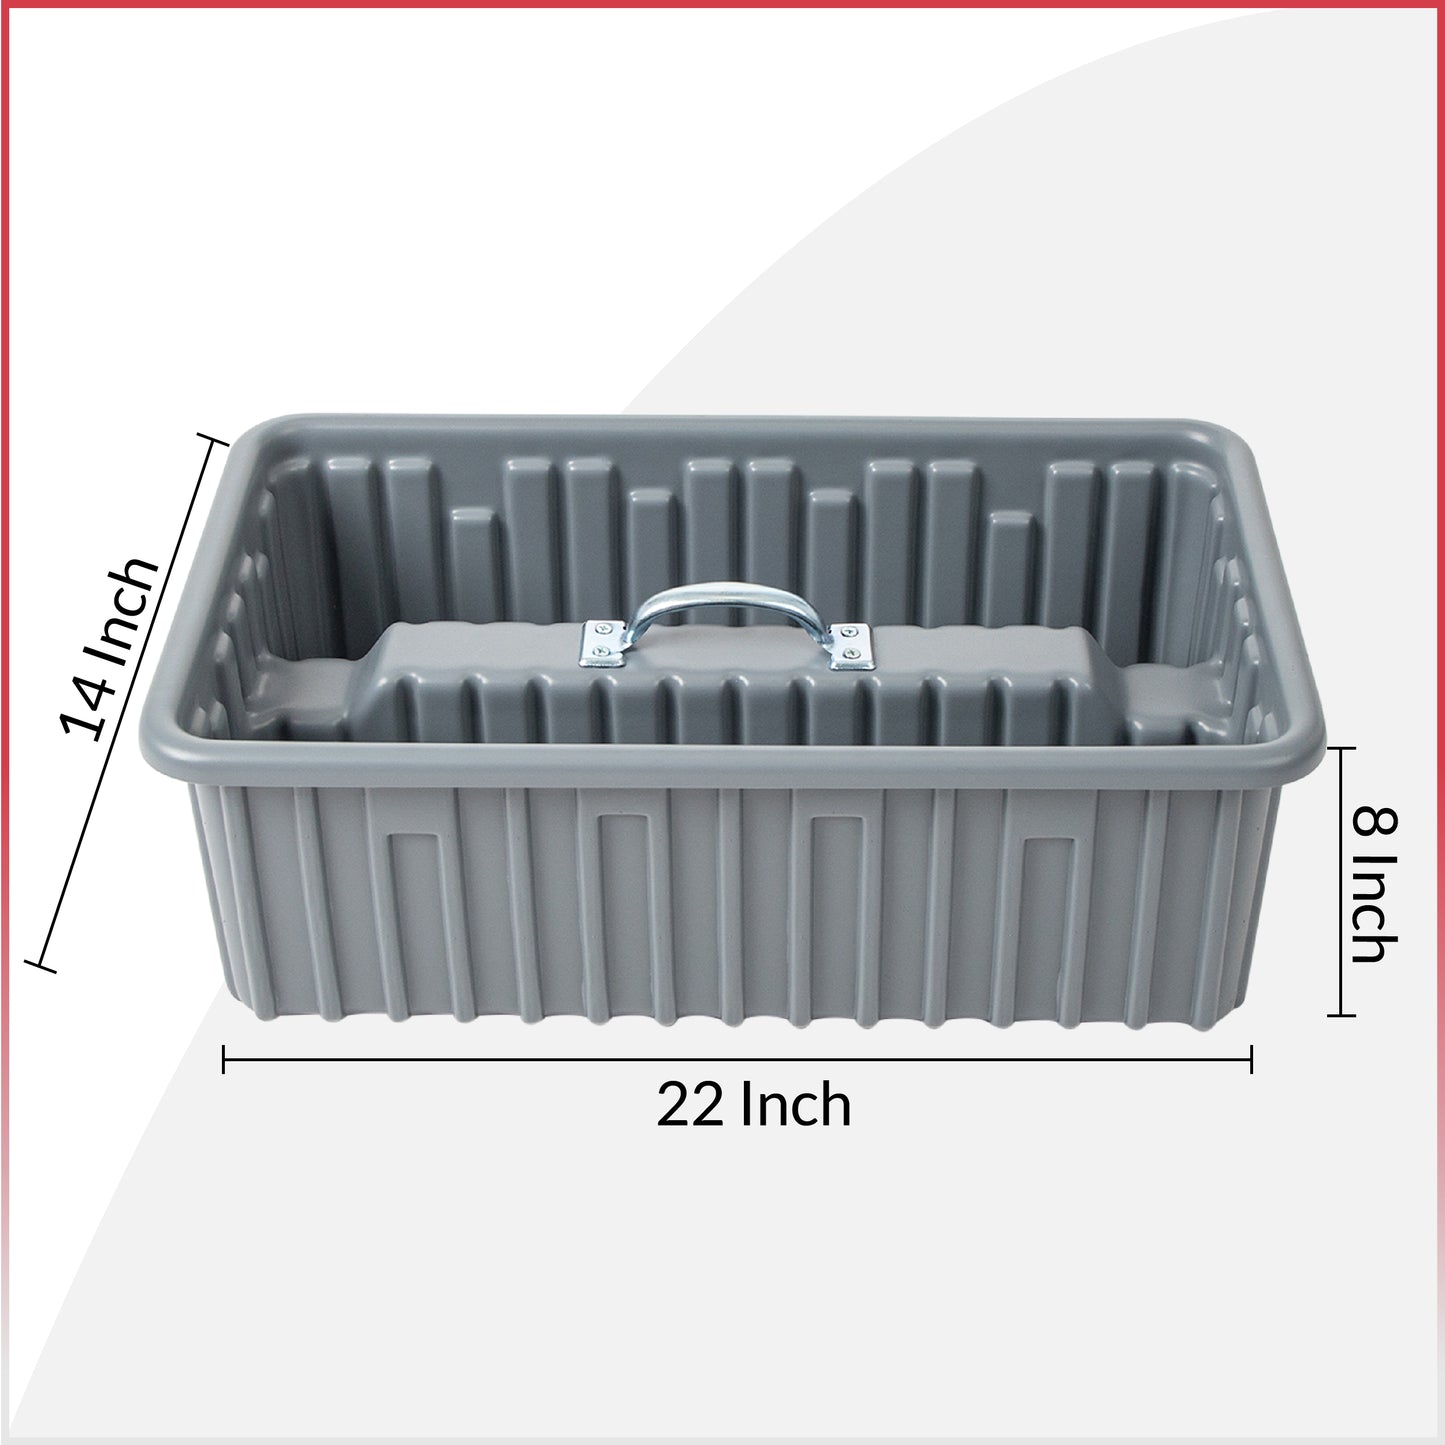 Pro-grade Saddle Tray 22″ x 14″ x 8″ straddles 2"x4" board with Lid and set of 6 dividers, HDPE with reinforced handle, Gray